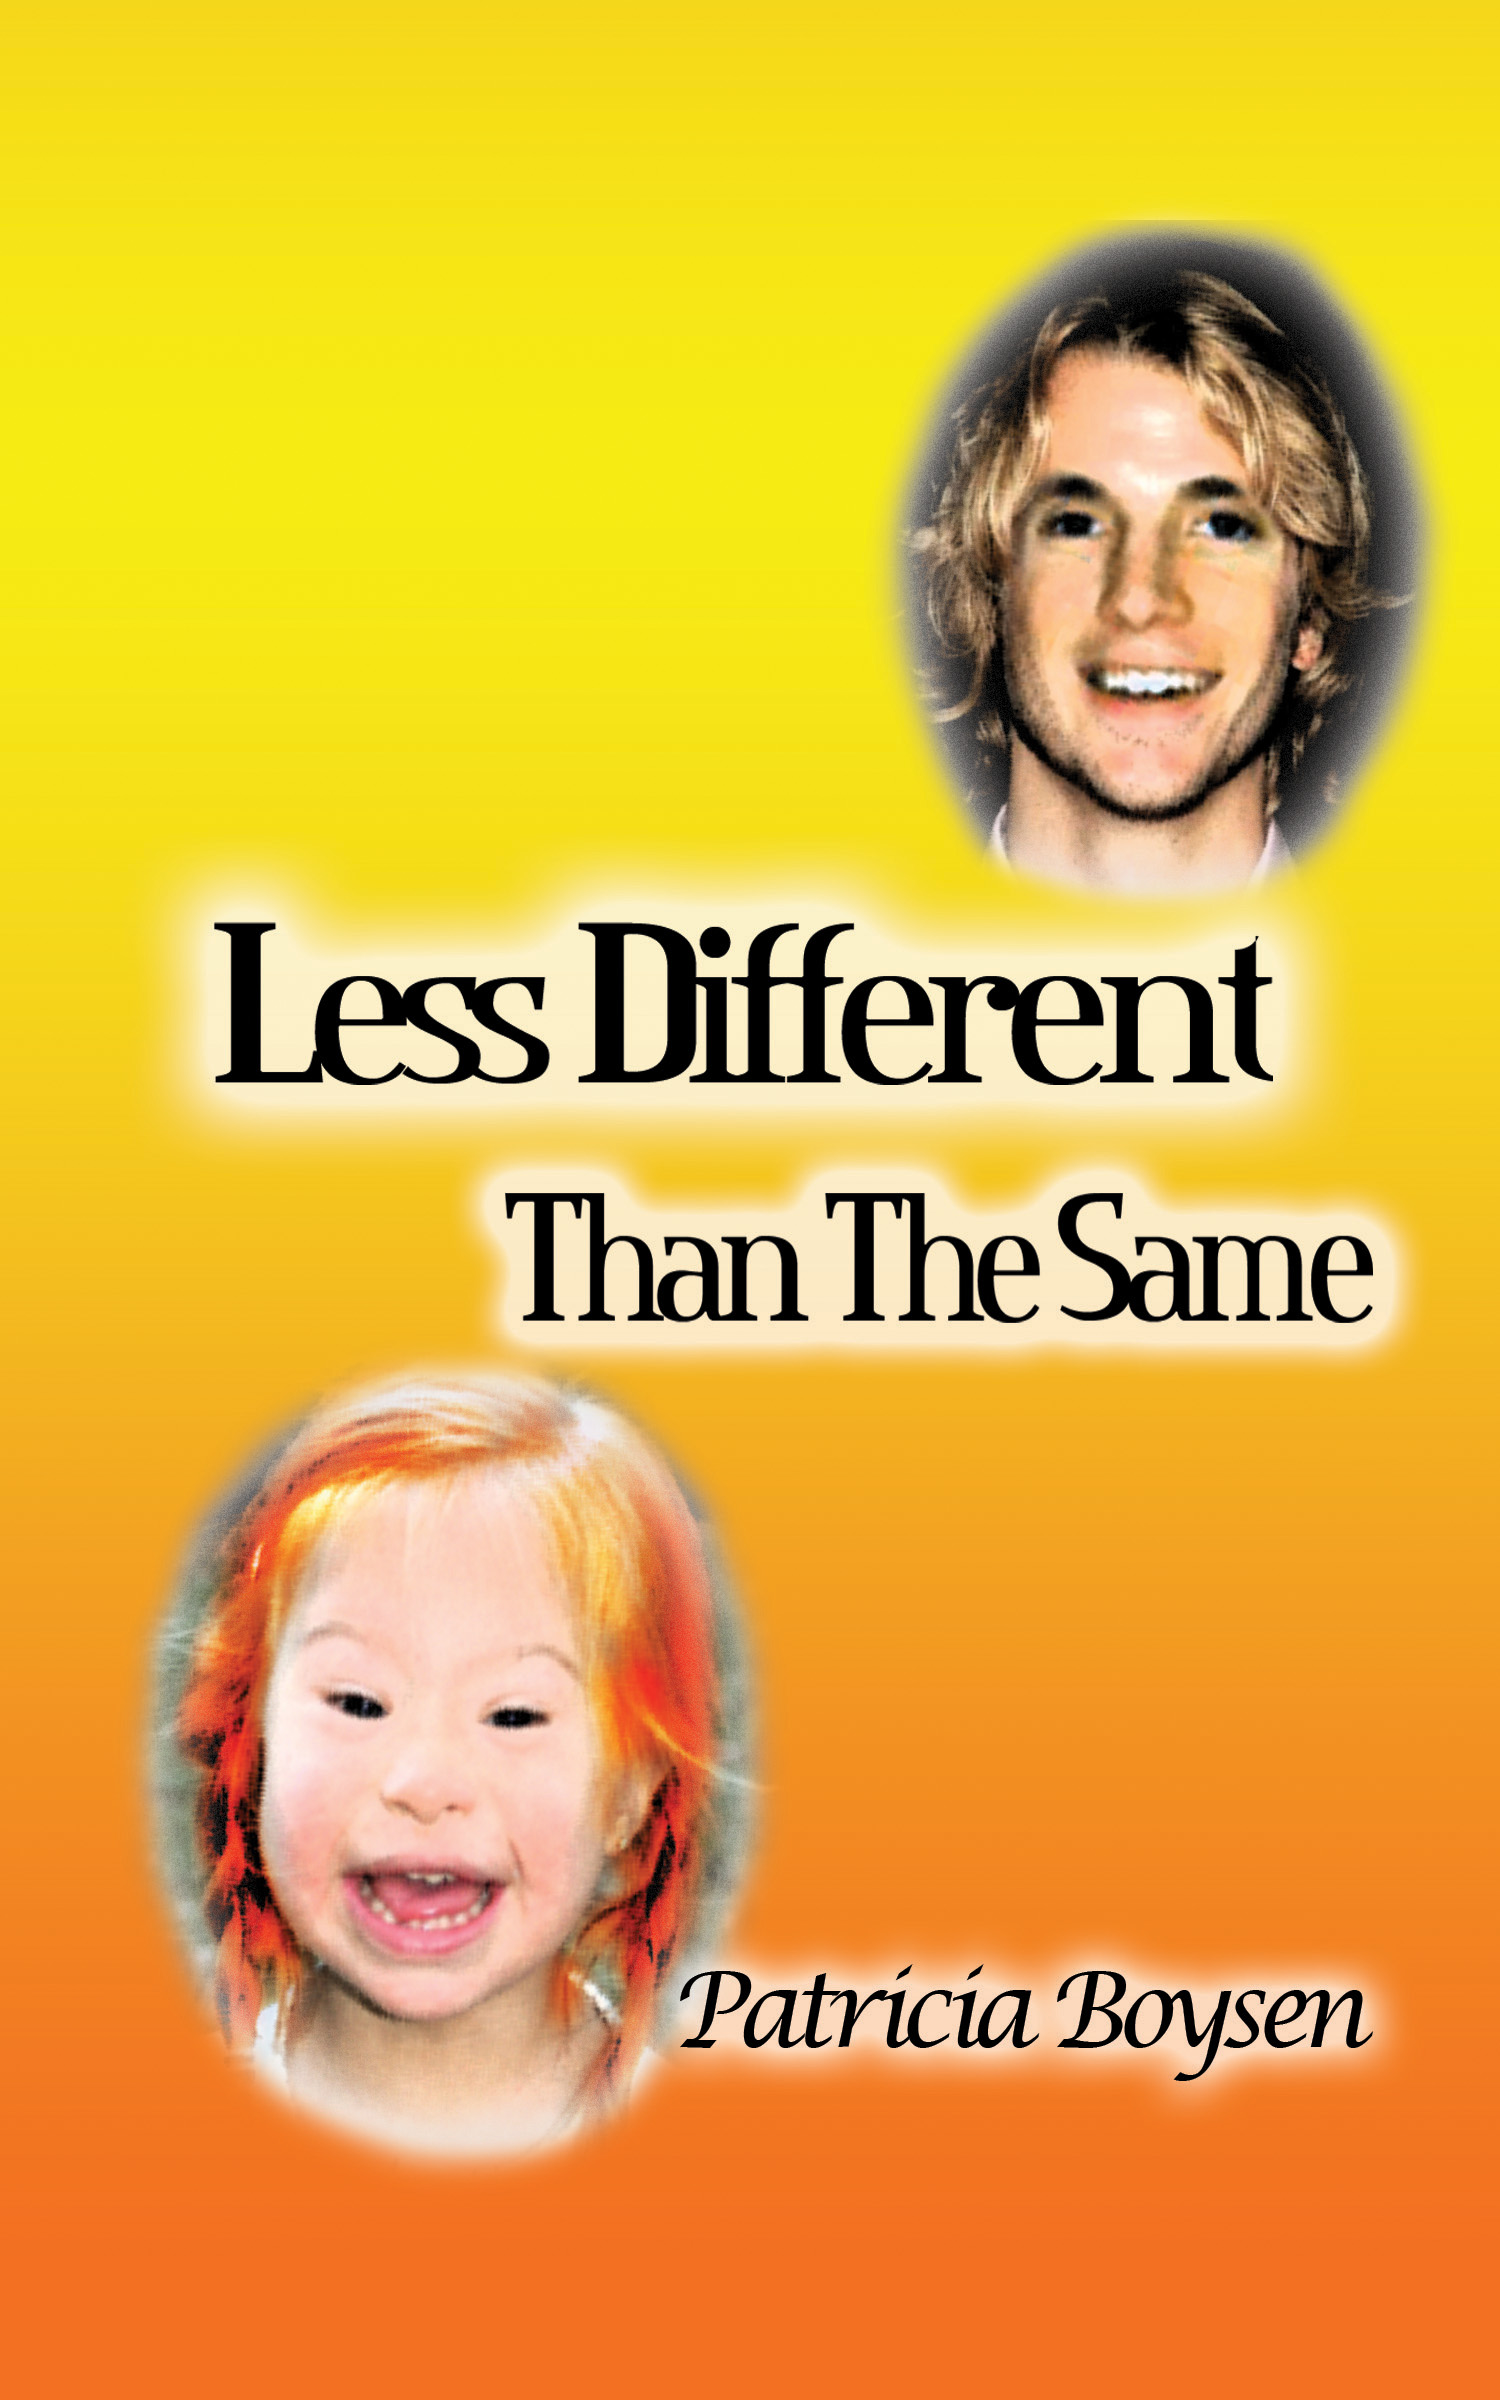 Less Different